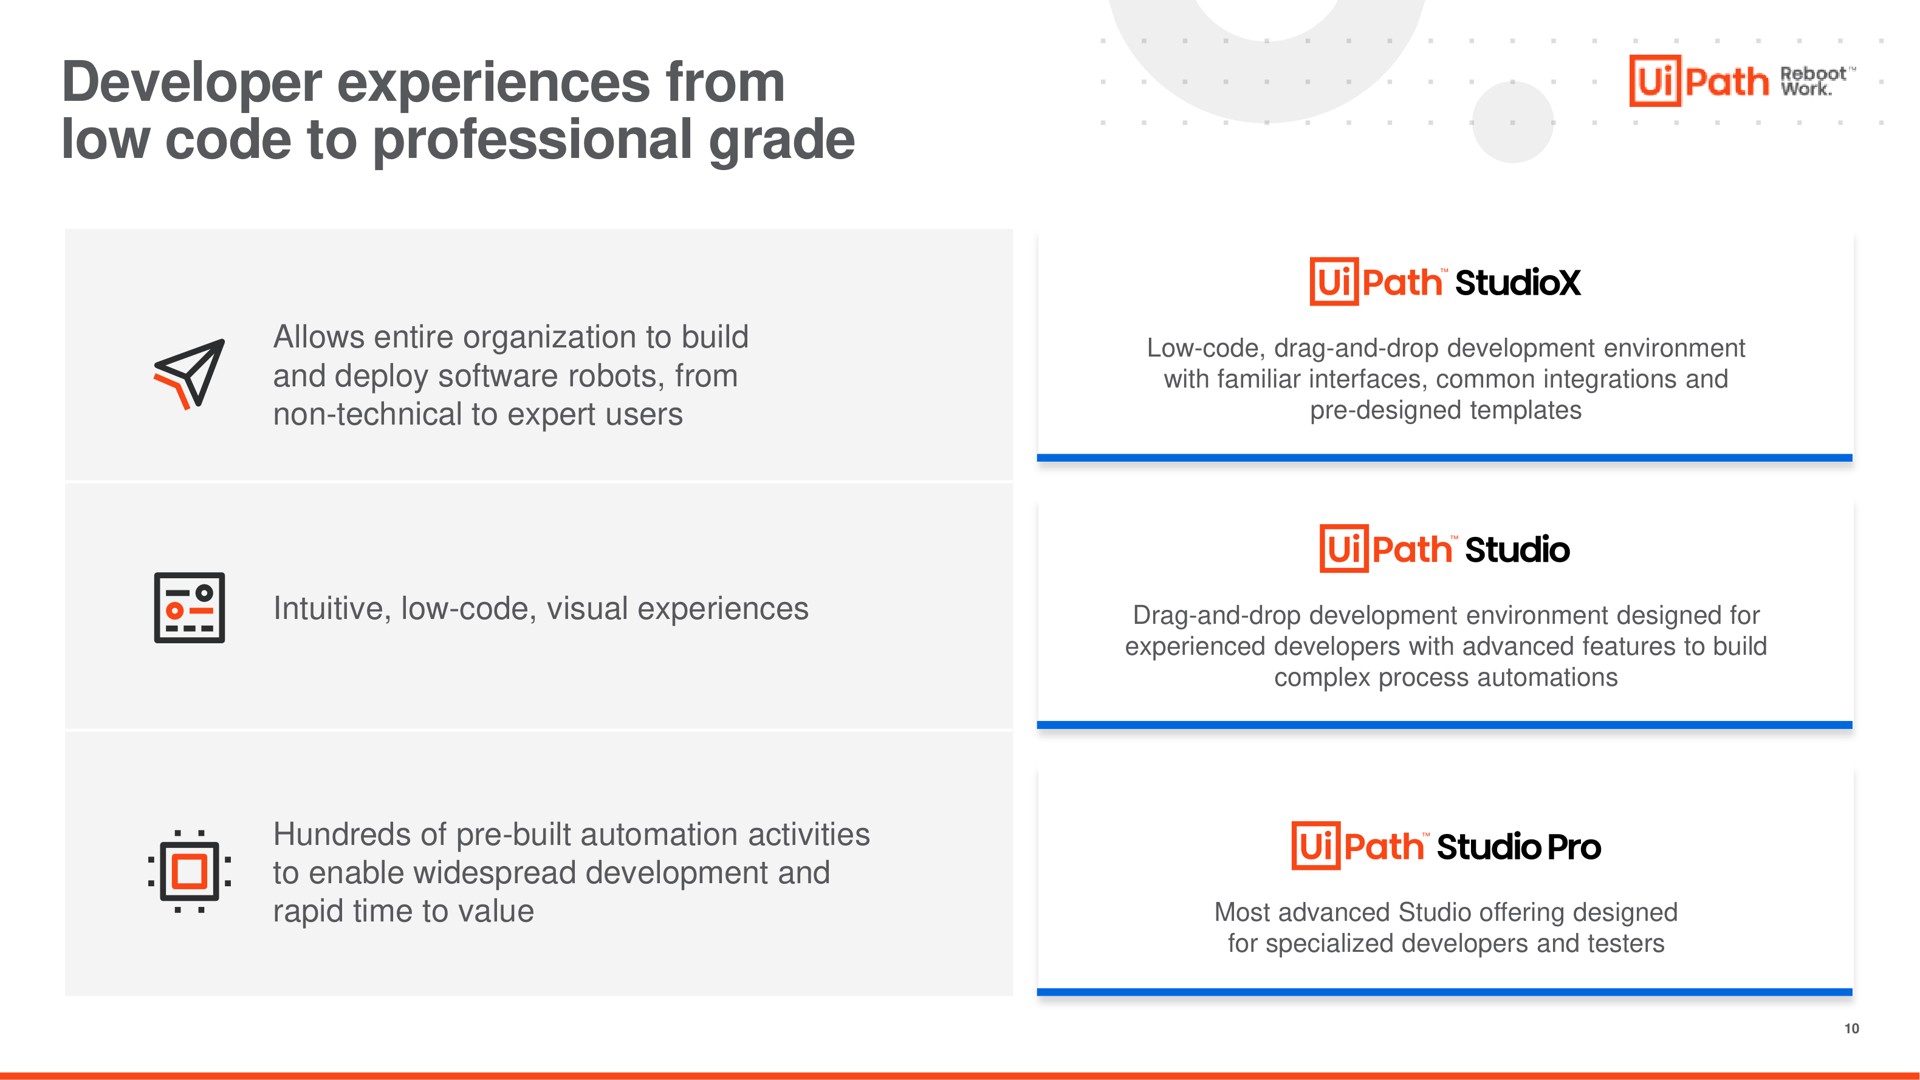 developer experiences from low code to professional grade path beer path path studio path studio pro | UiPath